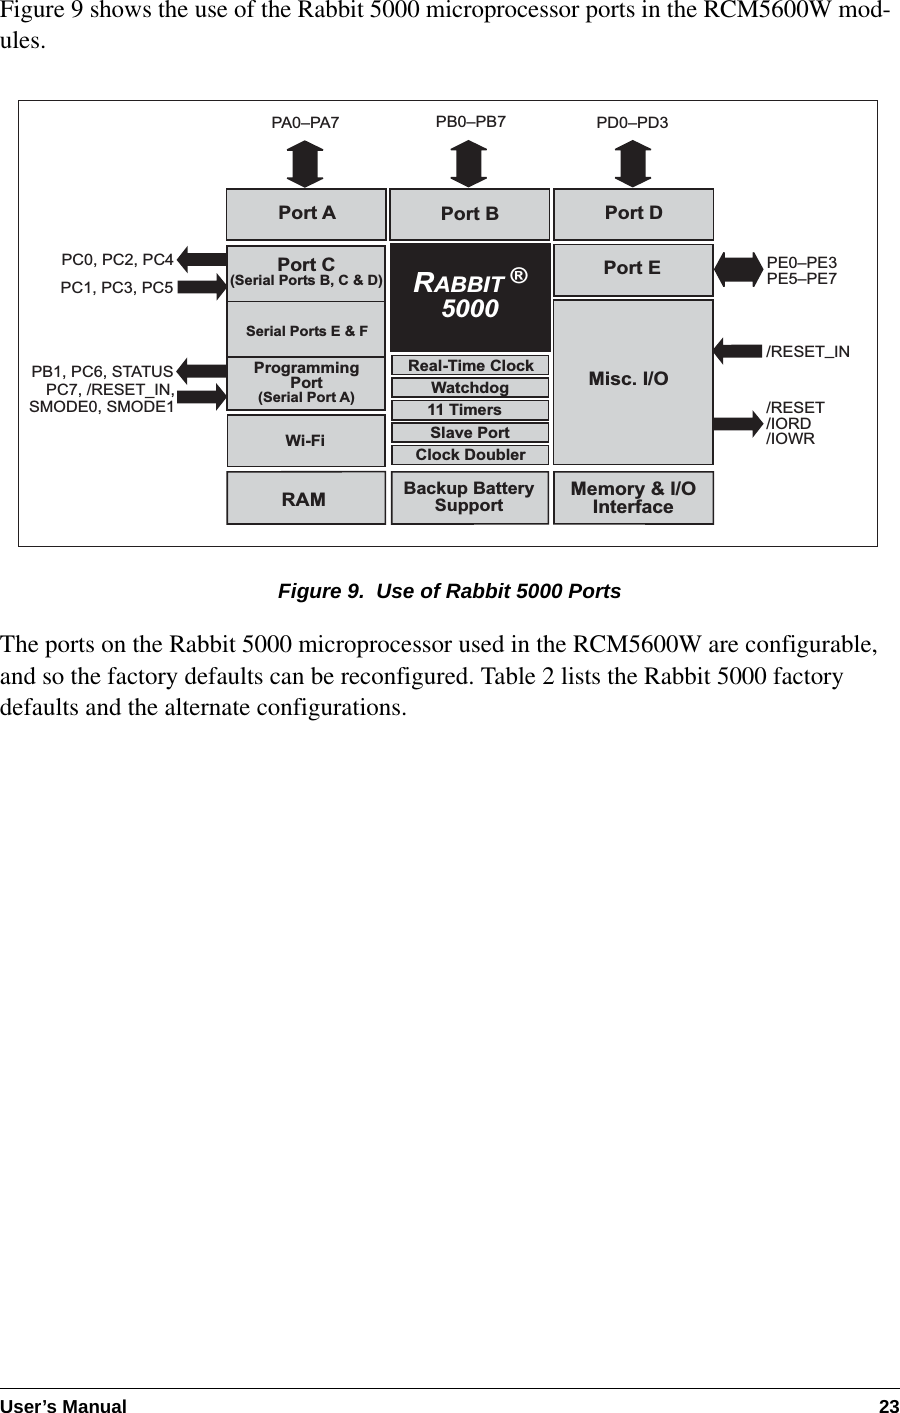 User’s Manual 23Figure 9 shows the use of the Rabbit 5000 microprocessor ports in the RCM5600W mod-ules.Figure 9.  Use of Rabbit 5000 PortsThe ports on the Rabbit 5000 microprocessor used in the RCM5600W are configurable, and so the factory defaults can be reconfigured. Table 2 lists the Rabbit 5000 factory defaults and the alternate configurations.RABBIT ®5000Port A Port B Port DPort EPA0PA7 PB0PB7PE0PE3PE5PE7PD0PD3/RESET/IORD/IOWRWatchdog11 TimersClock DoublerSlave PortReal-Time ClockBackup BatterySupportMisc. I/O/RESET_INPort C(Serial Ports B, C &amp; D)ProgrammingPort(Serial Port A)PB1, PC6, STATUSPC0, PC2, PC4PC1, PC3, PC5Serial Ports E &amp; FPC7, /RESET_IN,SMODE0, SMODE1Memory &amp; I/OInterfaceRAMWi-Fi